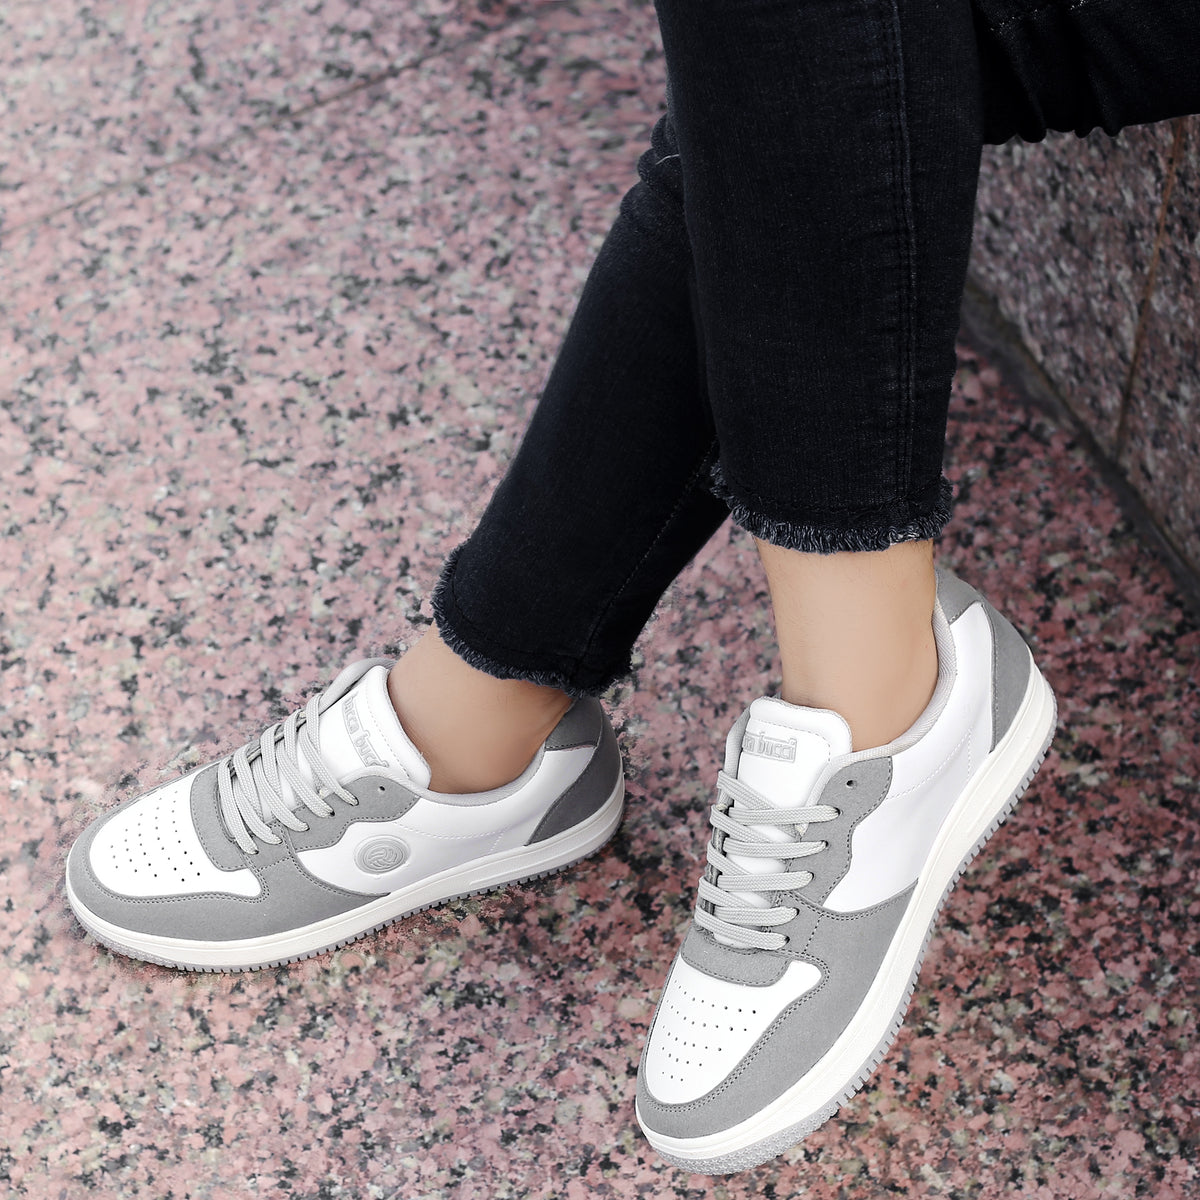 20 Best White Sneakers for Women 2022 - Classic Leather Shoes